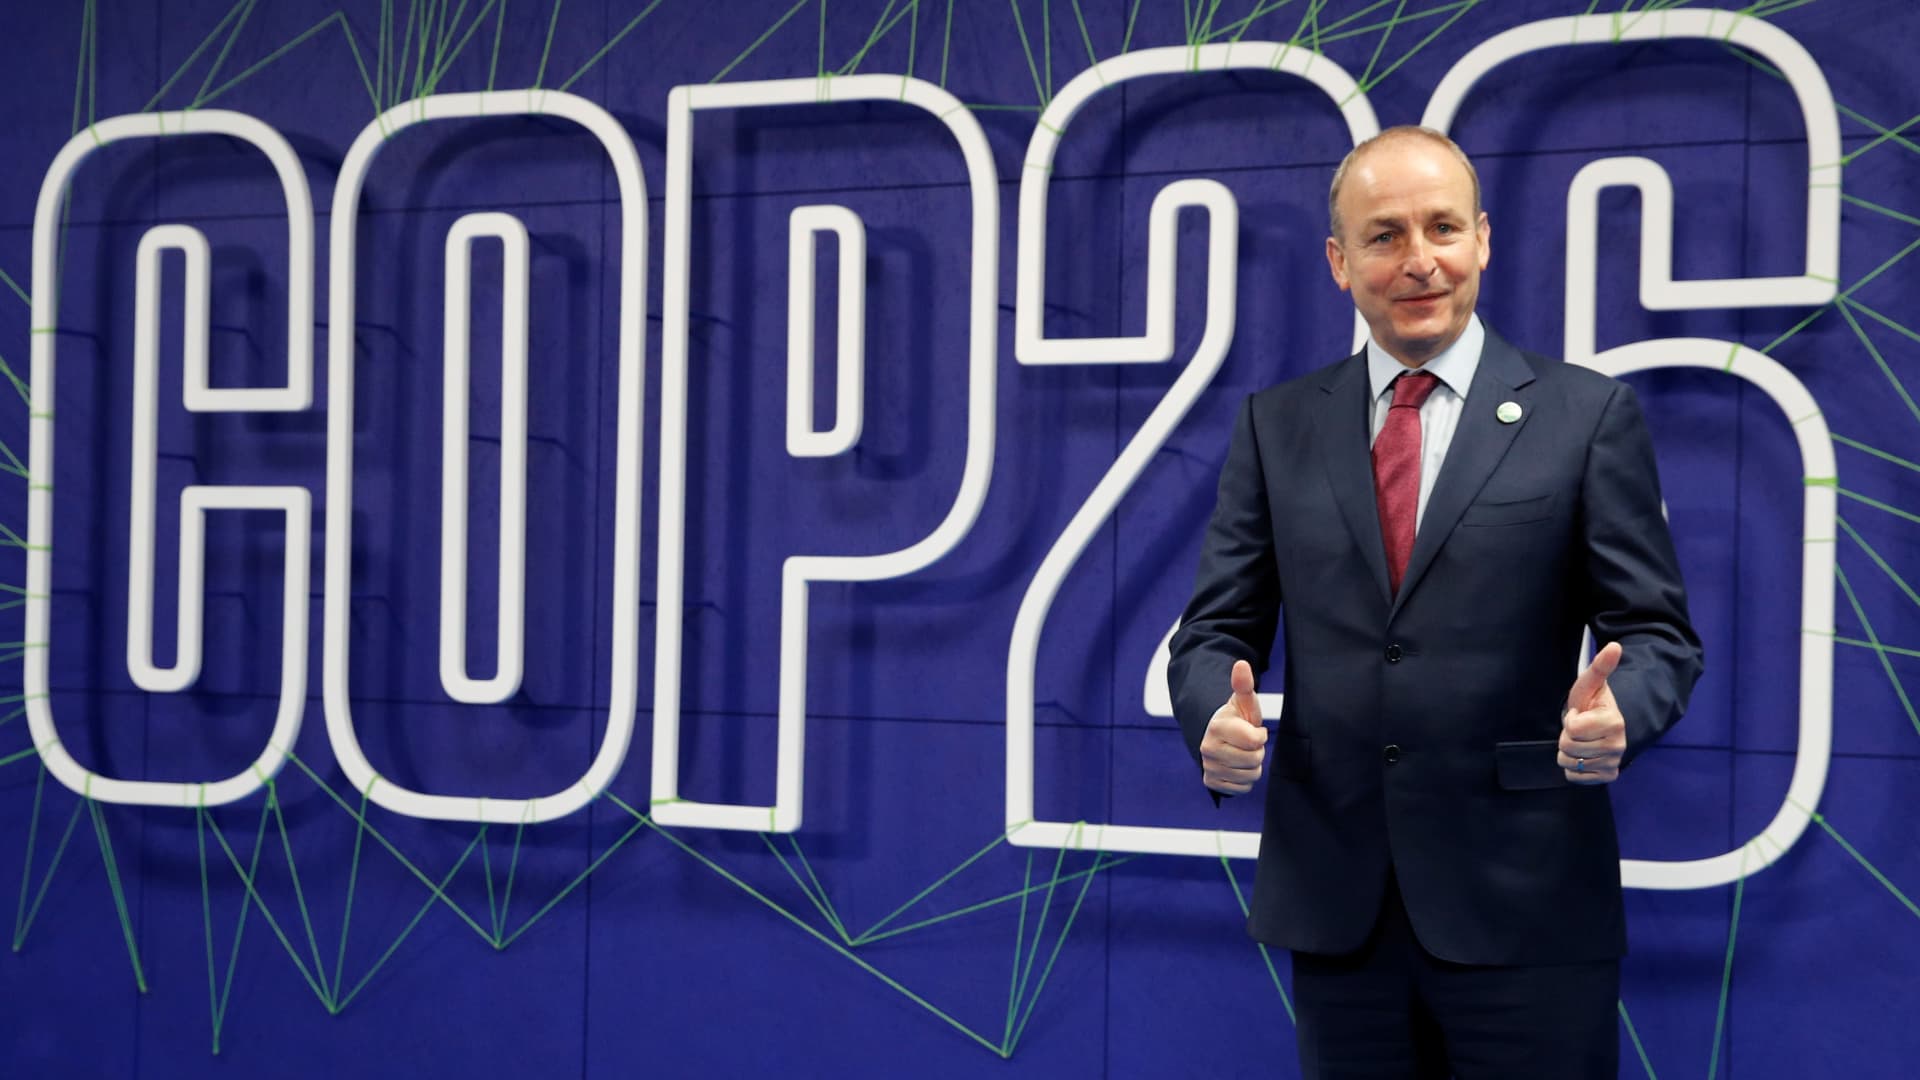 Ireland's Prime Minister (Taoiseach) Micheal Martin arrives for the UN Climate Change Conference (COP26) in Glasgow, Scotland, Britain, November 1, 2021.